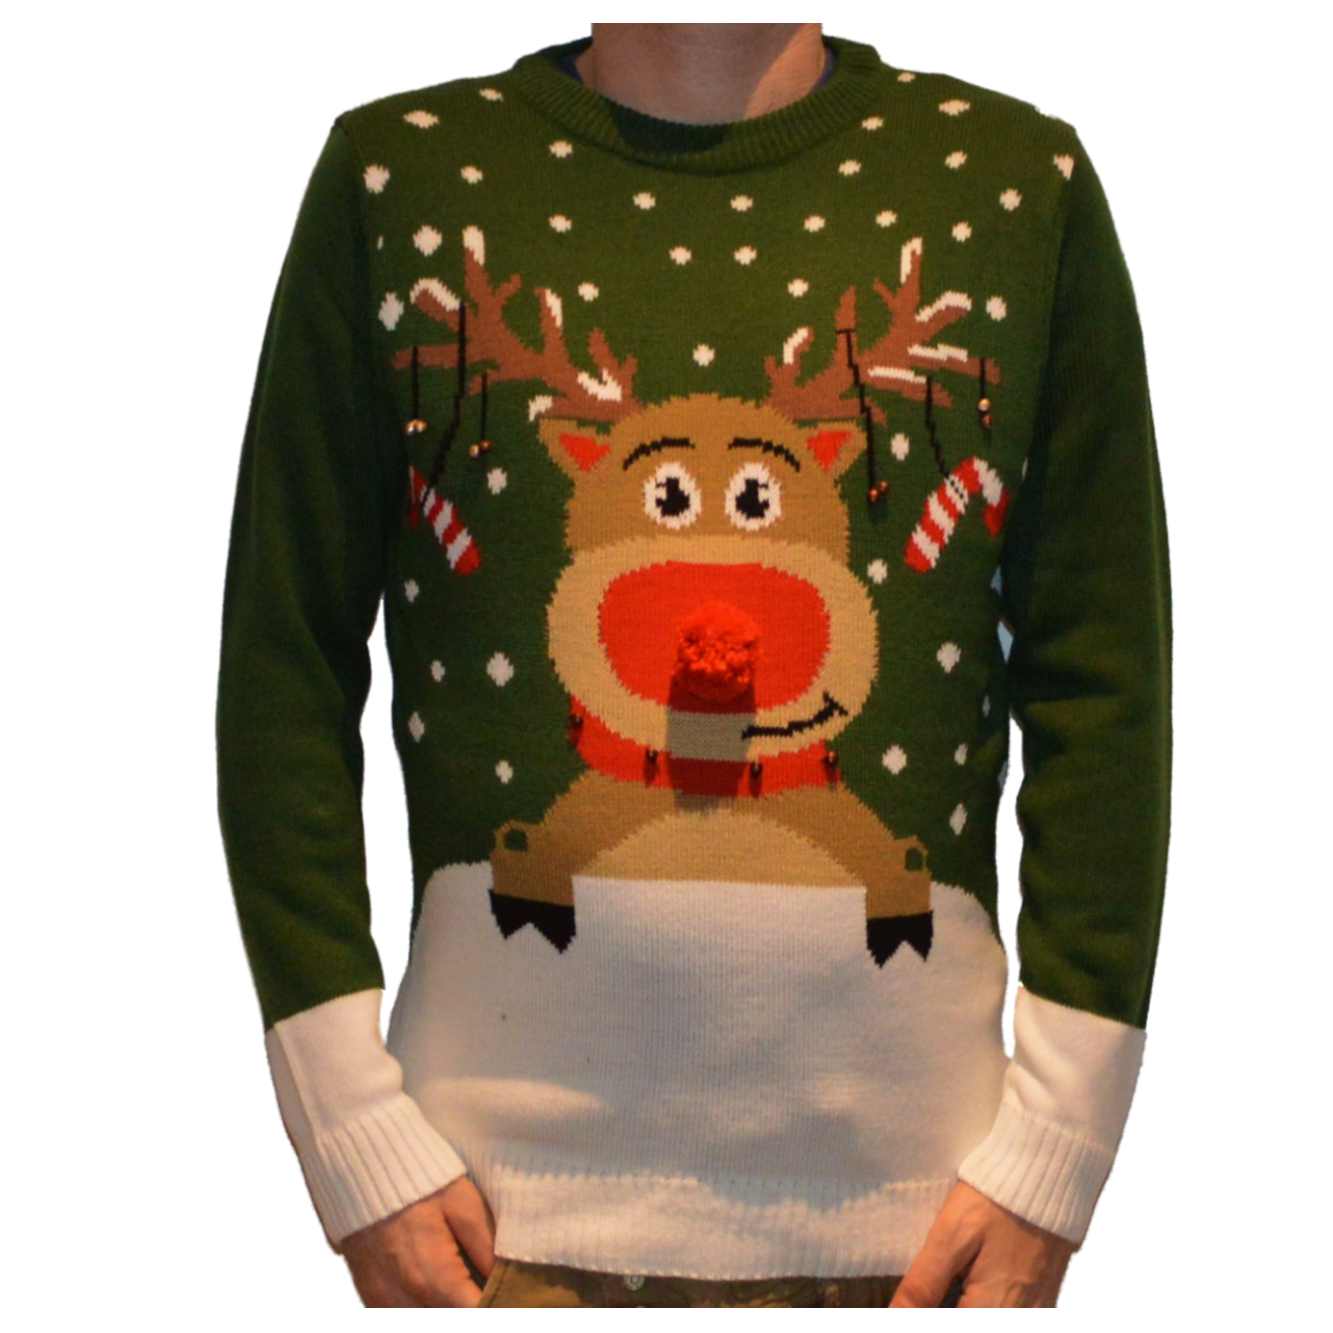 M L XL or XXL Winter Festive 3D Knitted Christmas Jumper in S